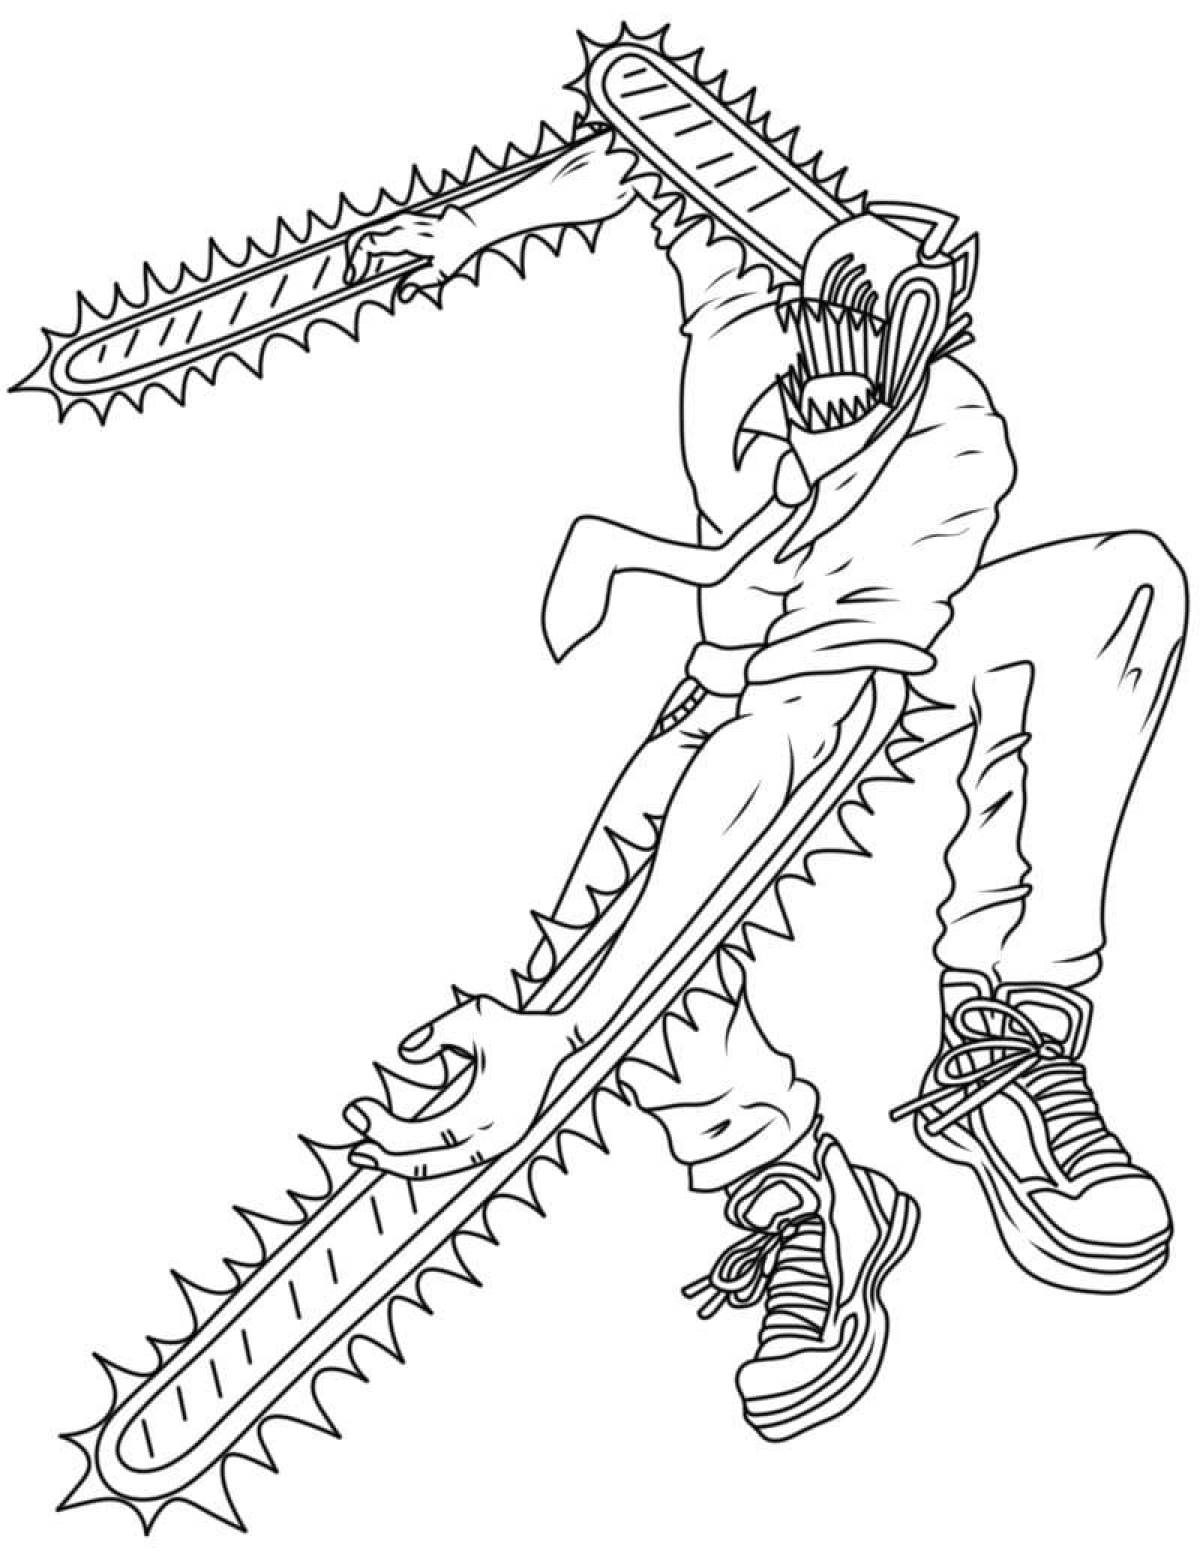 Coloring anime man with a chainsaw